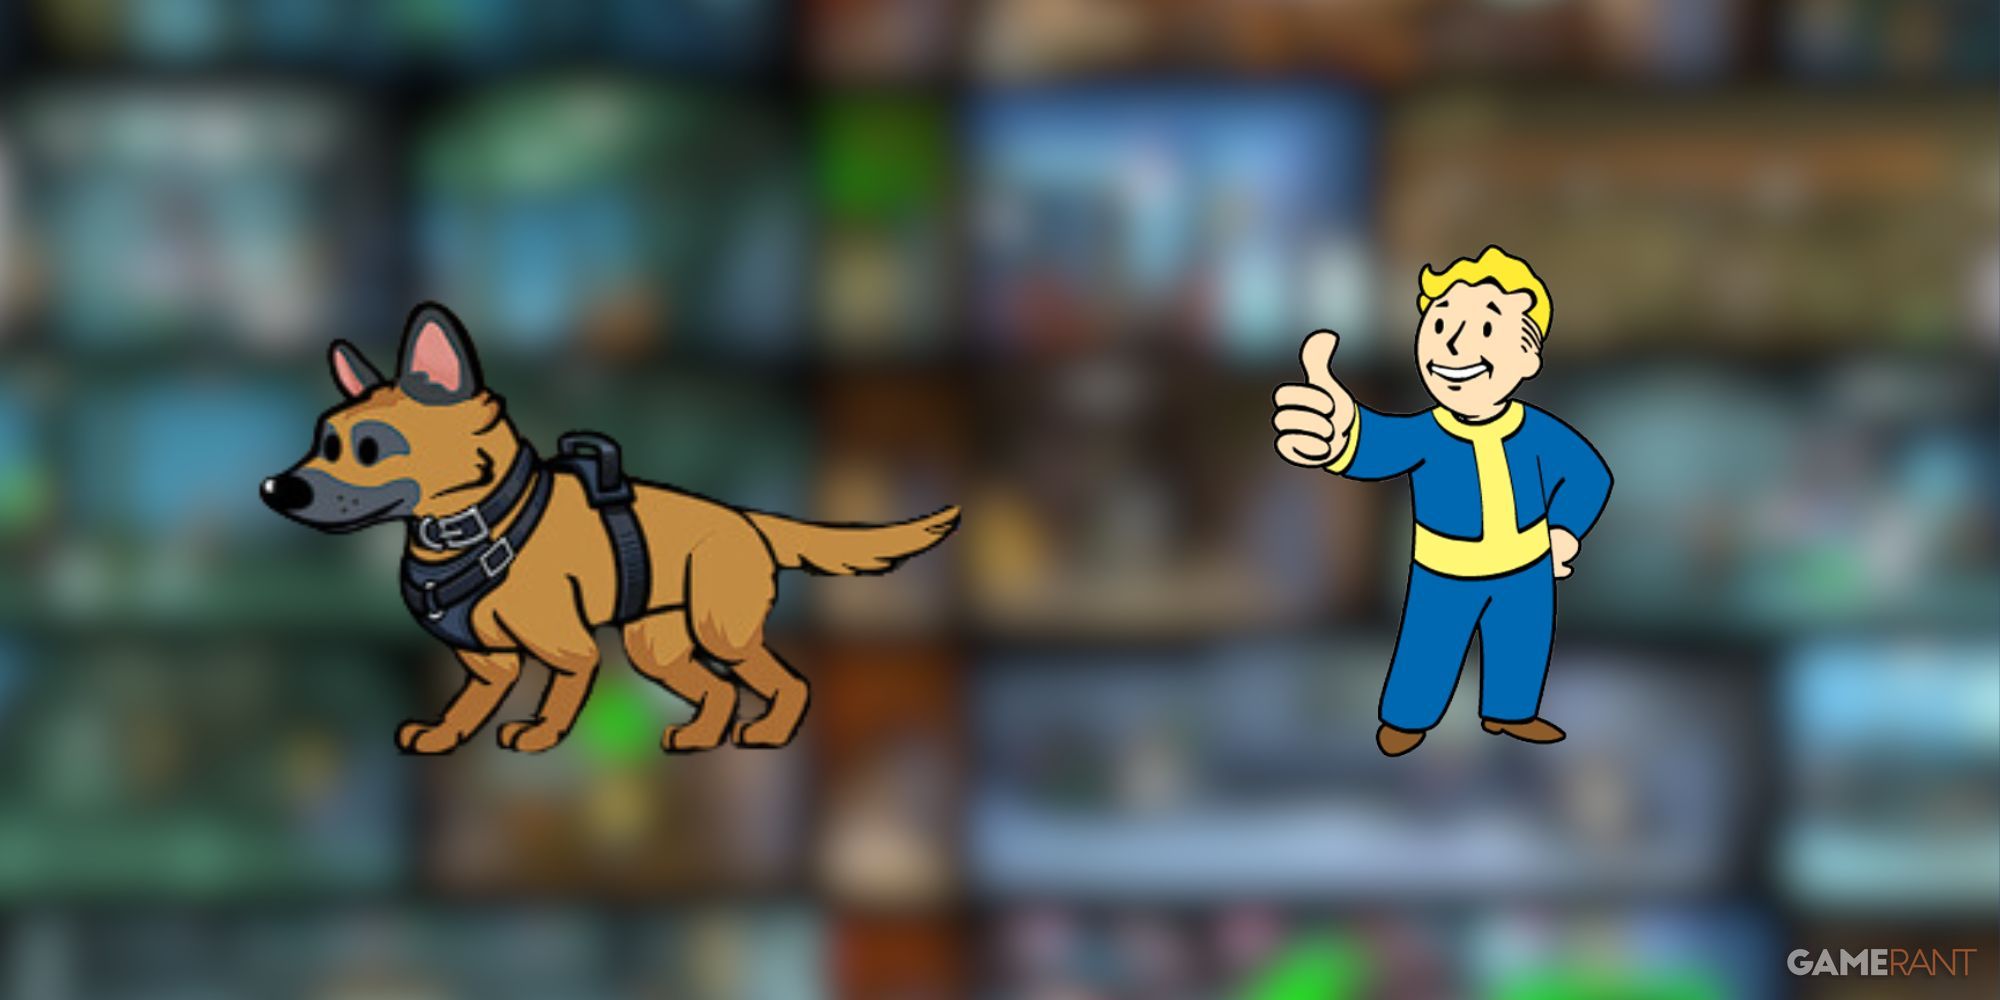 Fallout Shelter - CX404 and Vault Boy